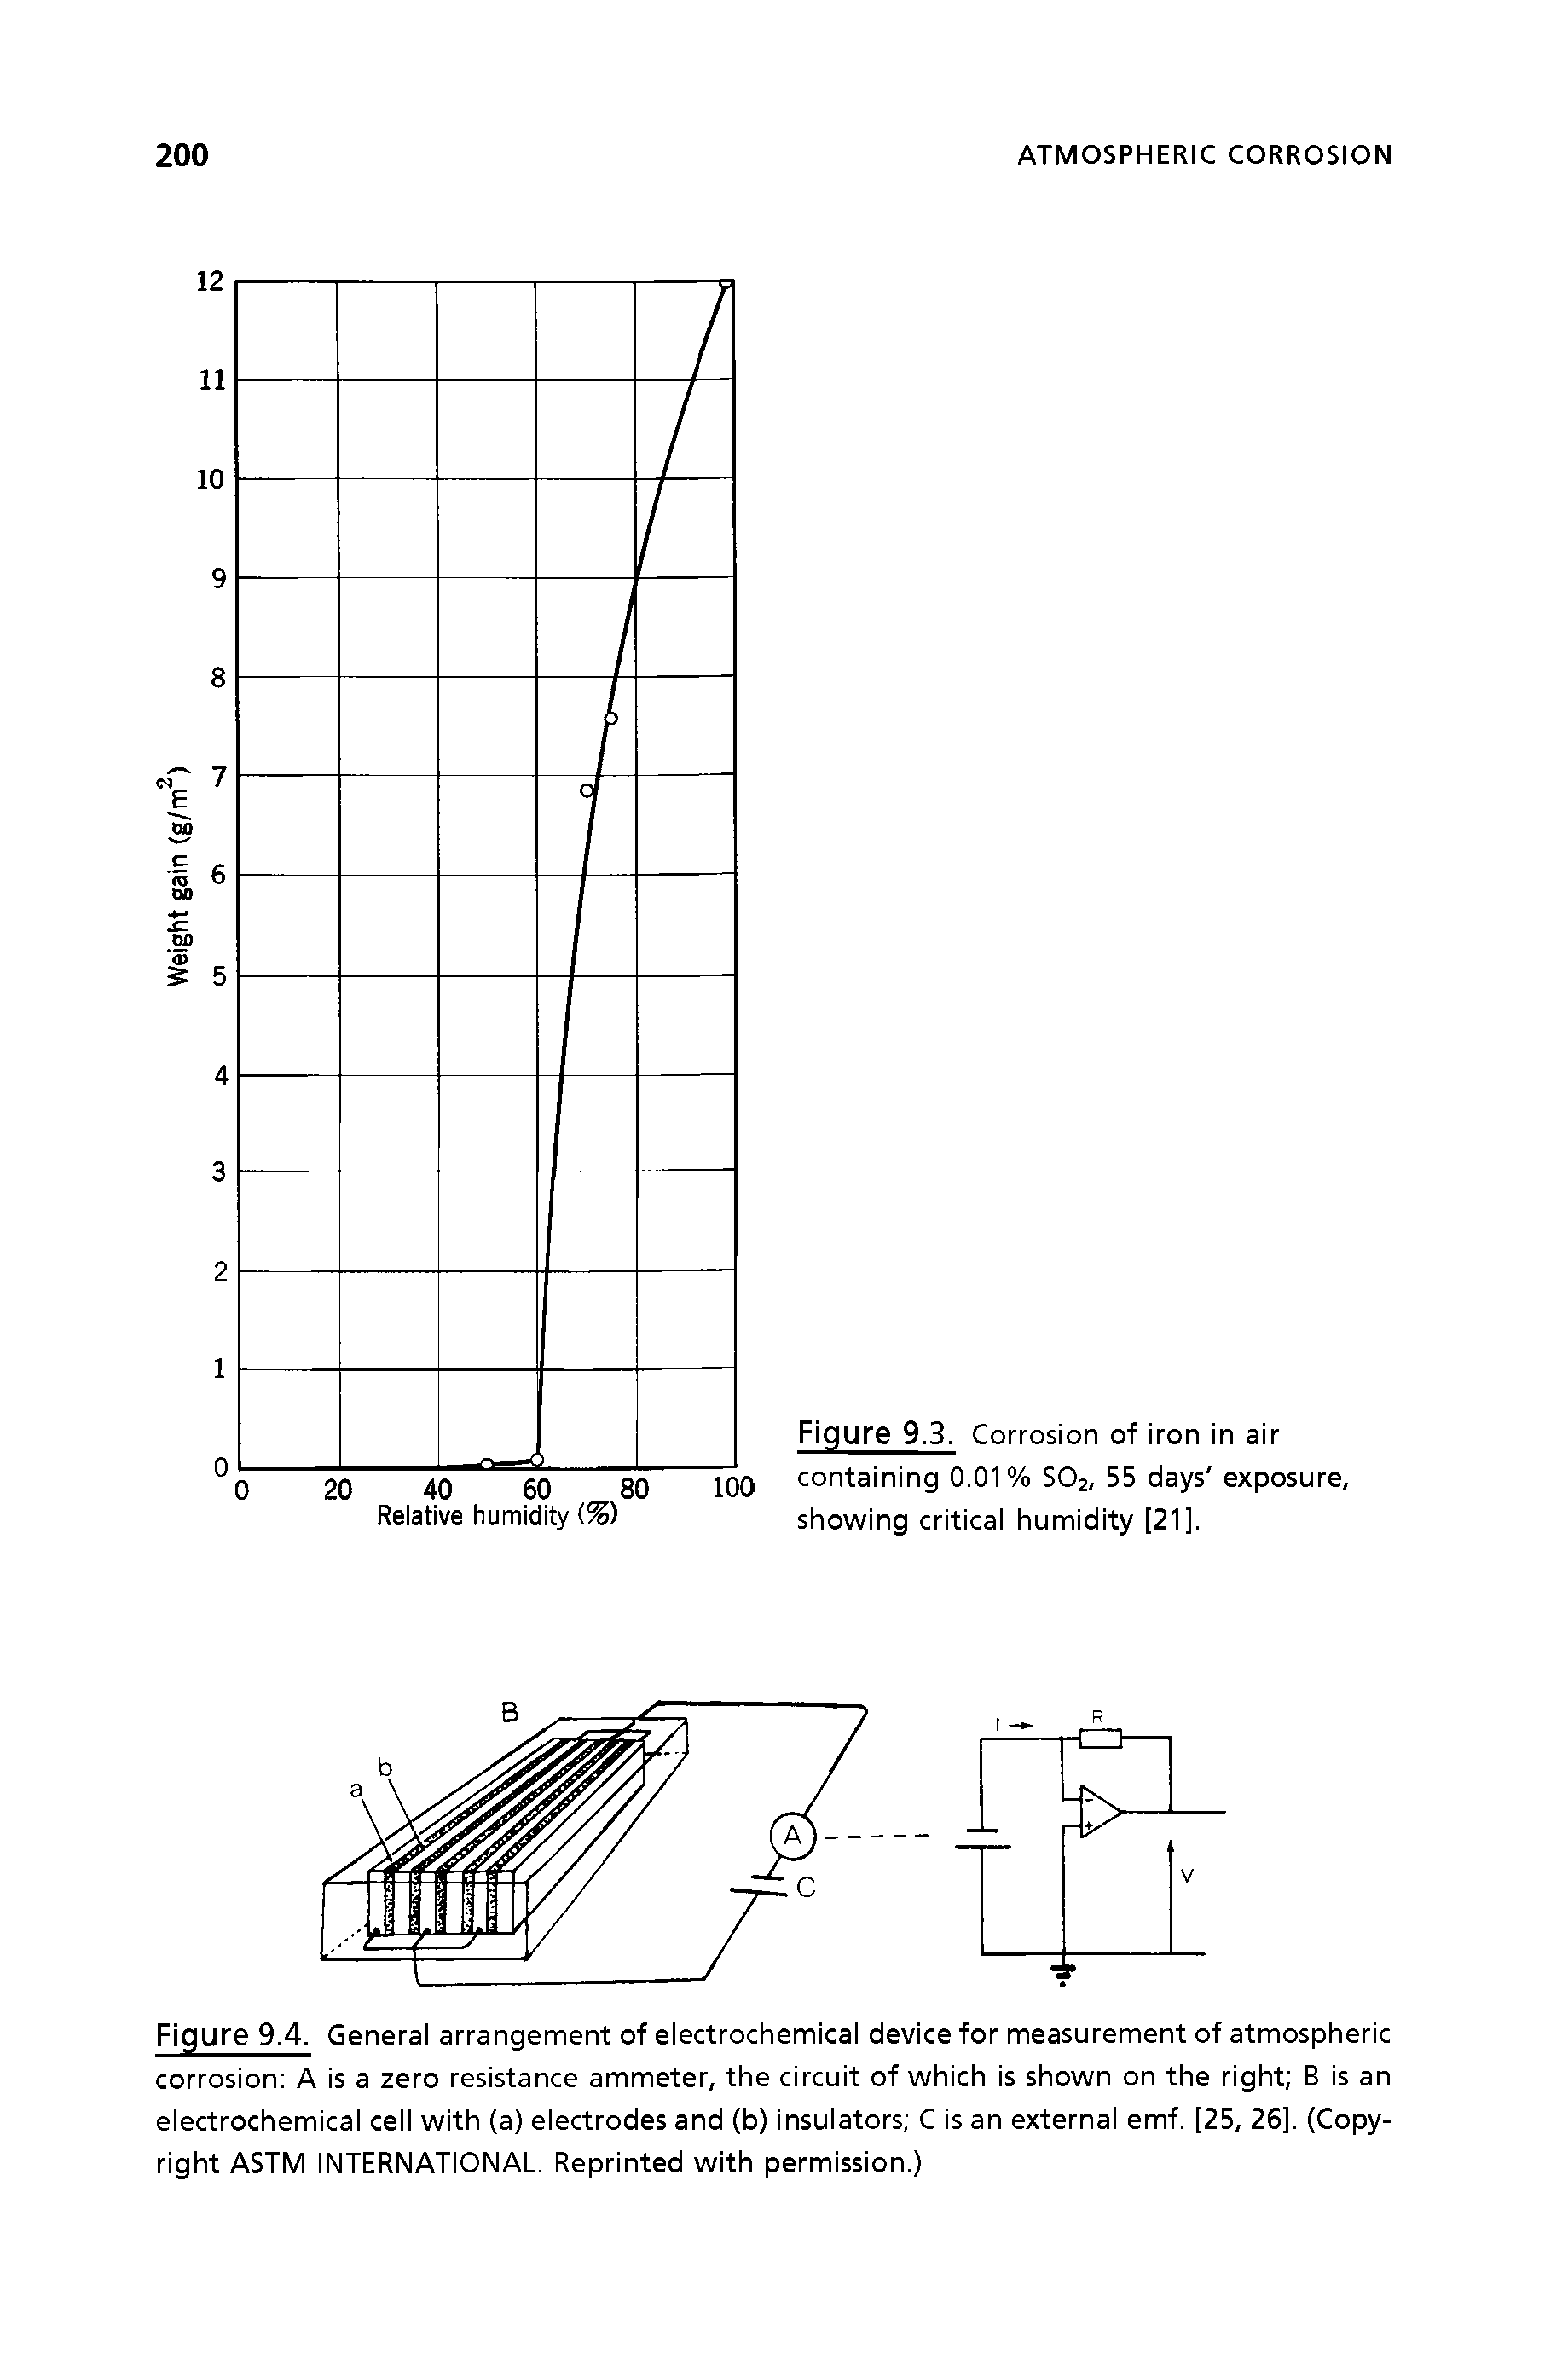 Figure 9.4. General arrangement of electrochemical device for measurement of atmospheric corrosion A is a zero resistance ammeter, the circuit of which is shown on the right B is an electrochemical cell with (a) electrodes and (b) insulators C is an external emf. [25, 26], (Copyright ASTM INTERNATIONAL. Reprinted with permission.)...